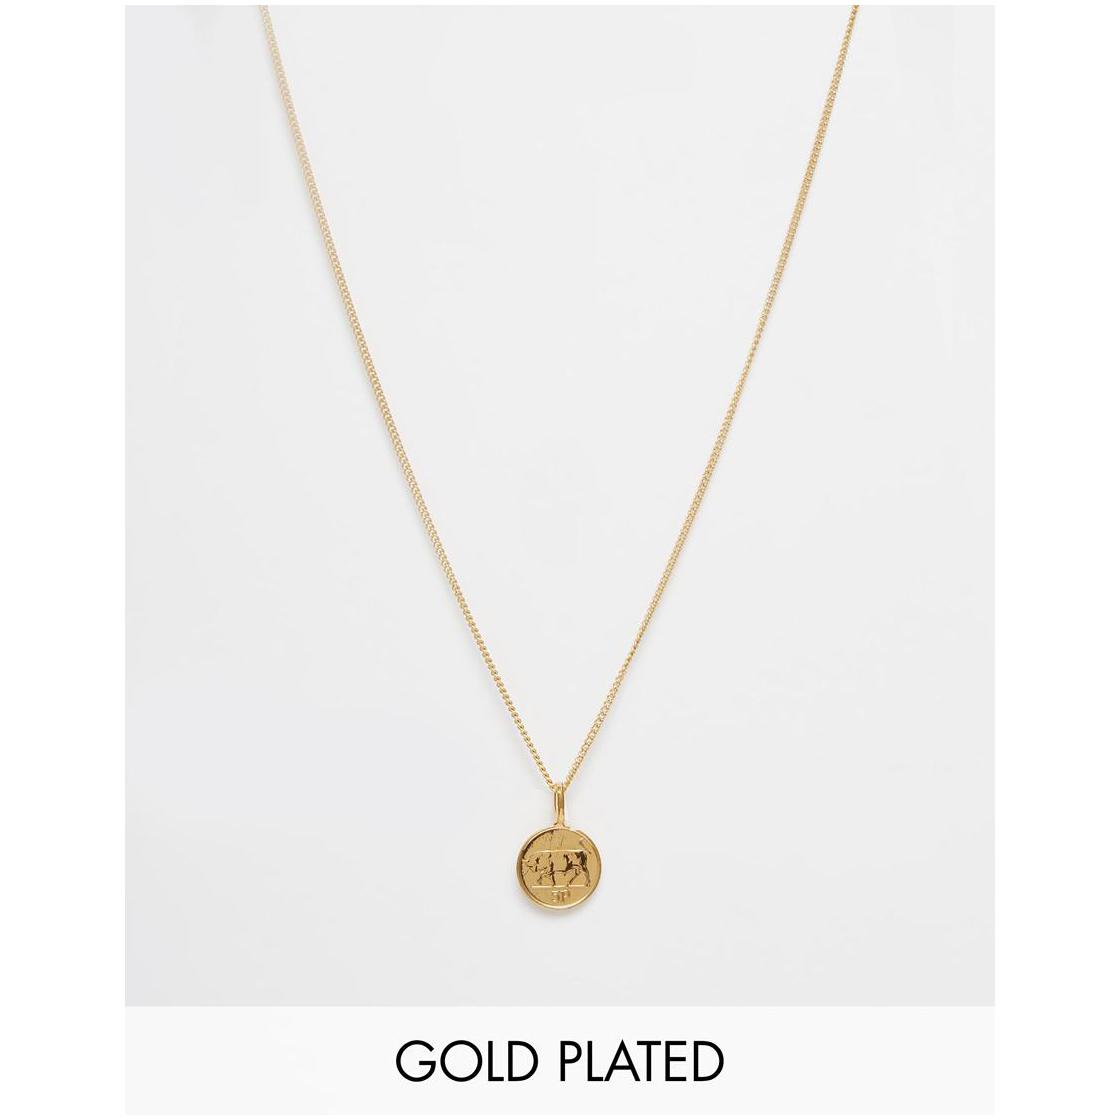 womens gold necklace katie mullally womenu0027s gold five pence irish coin necklace bktxwll